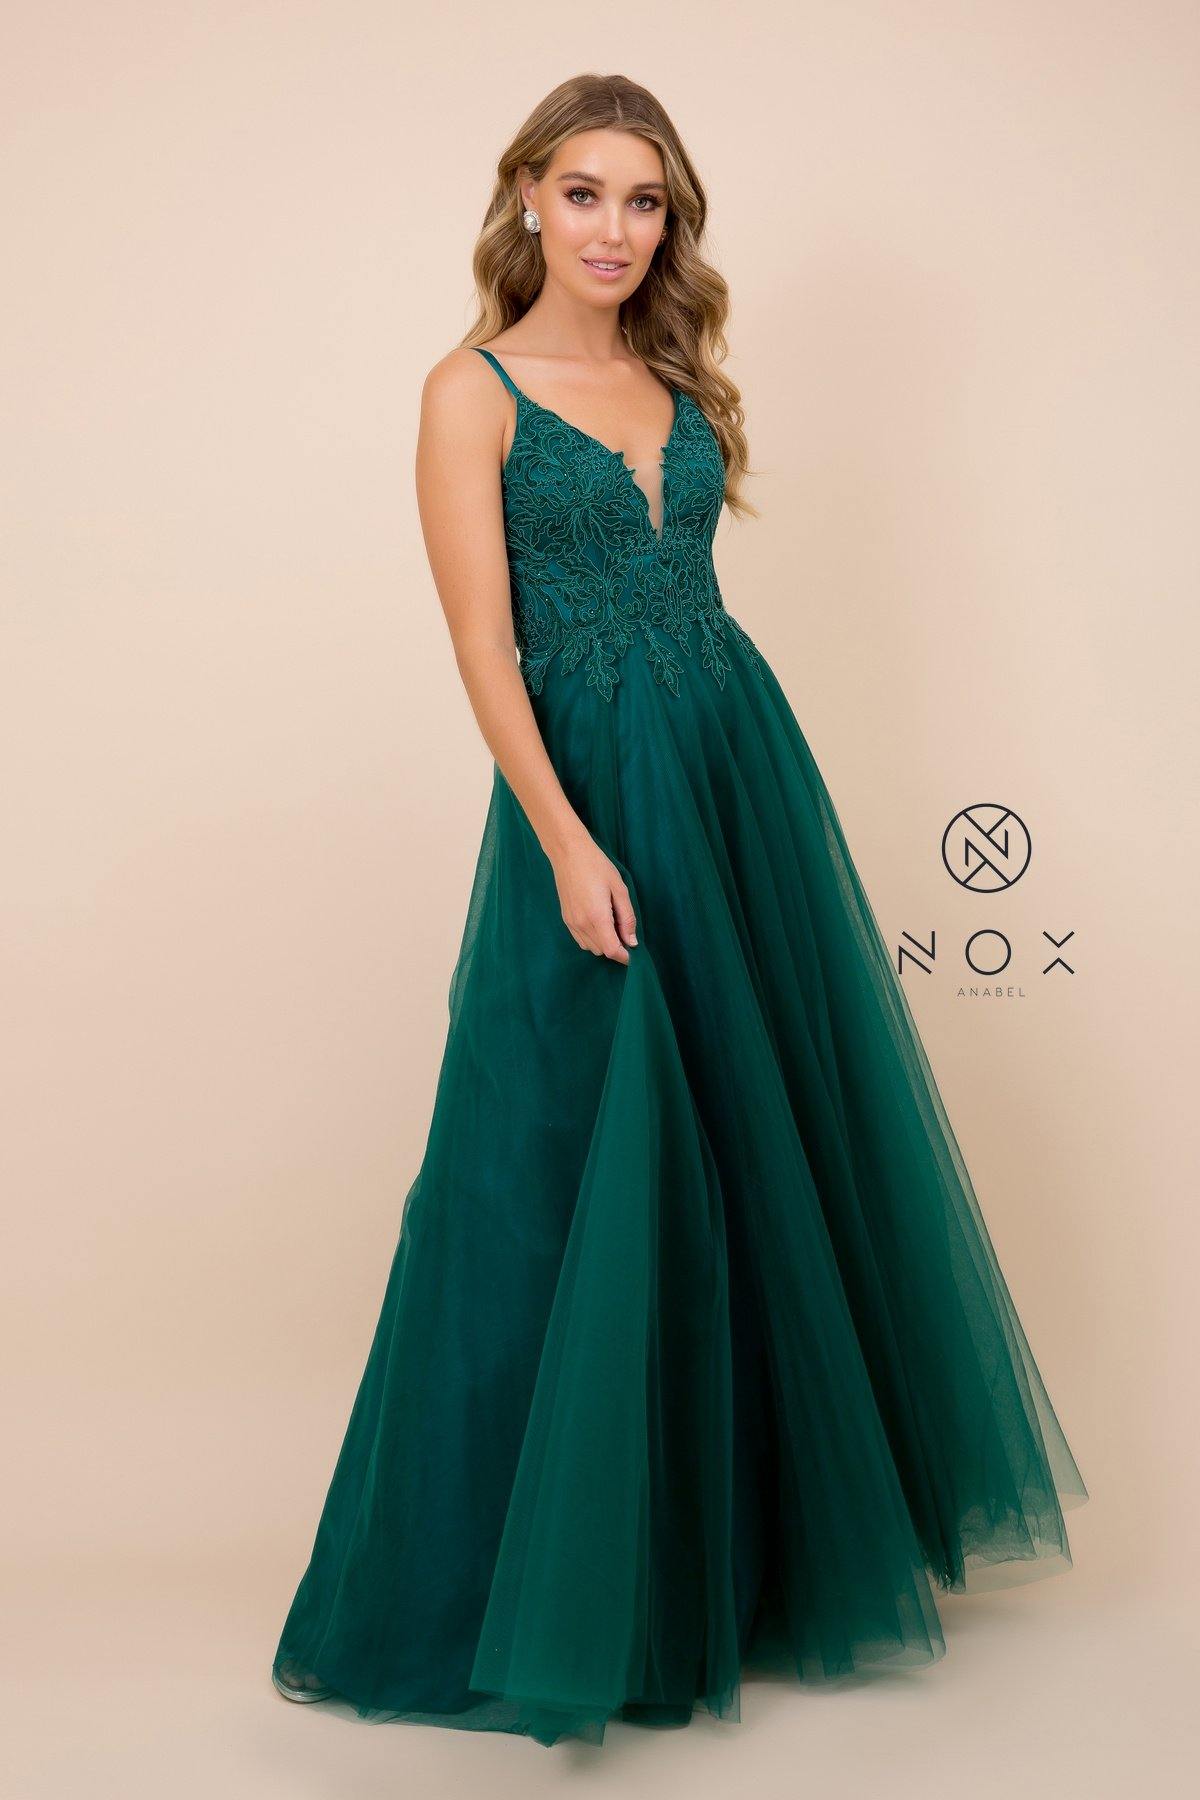 Long Tulle Embroidered Bodice Dress Prom Gown - The Dress Outlet Nox Anabel